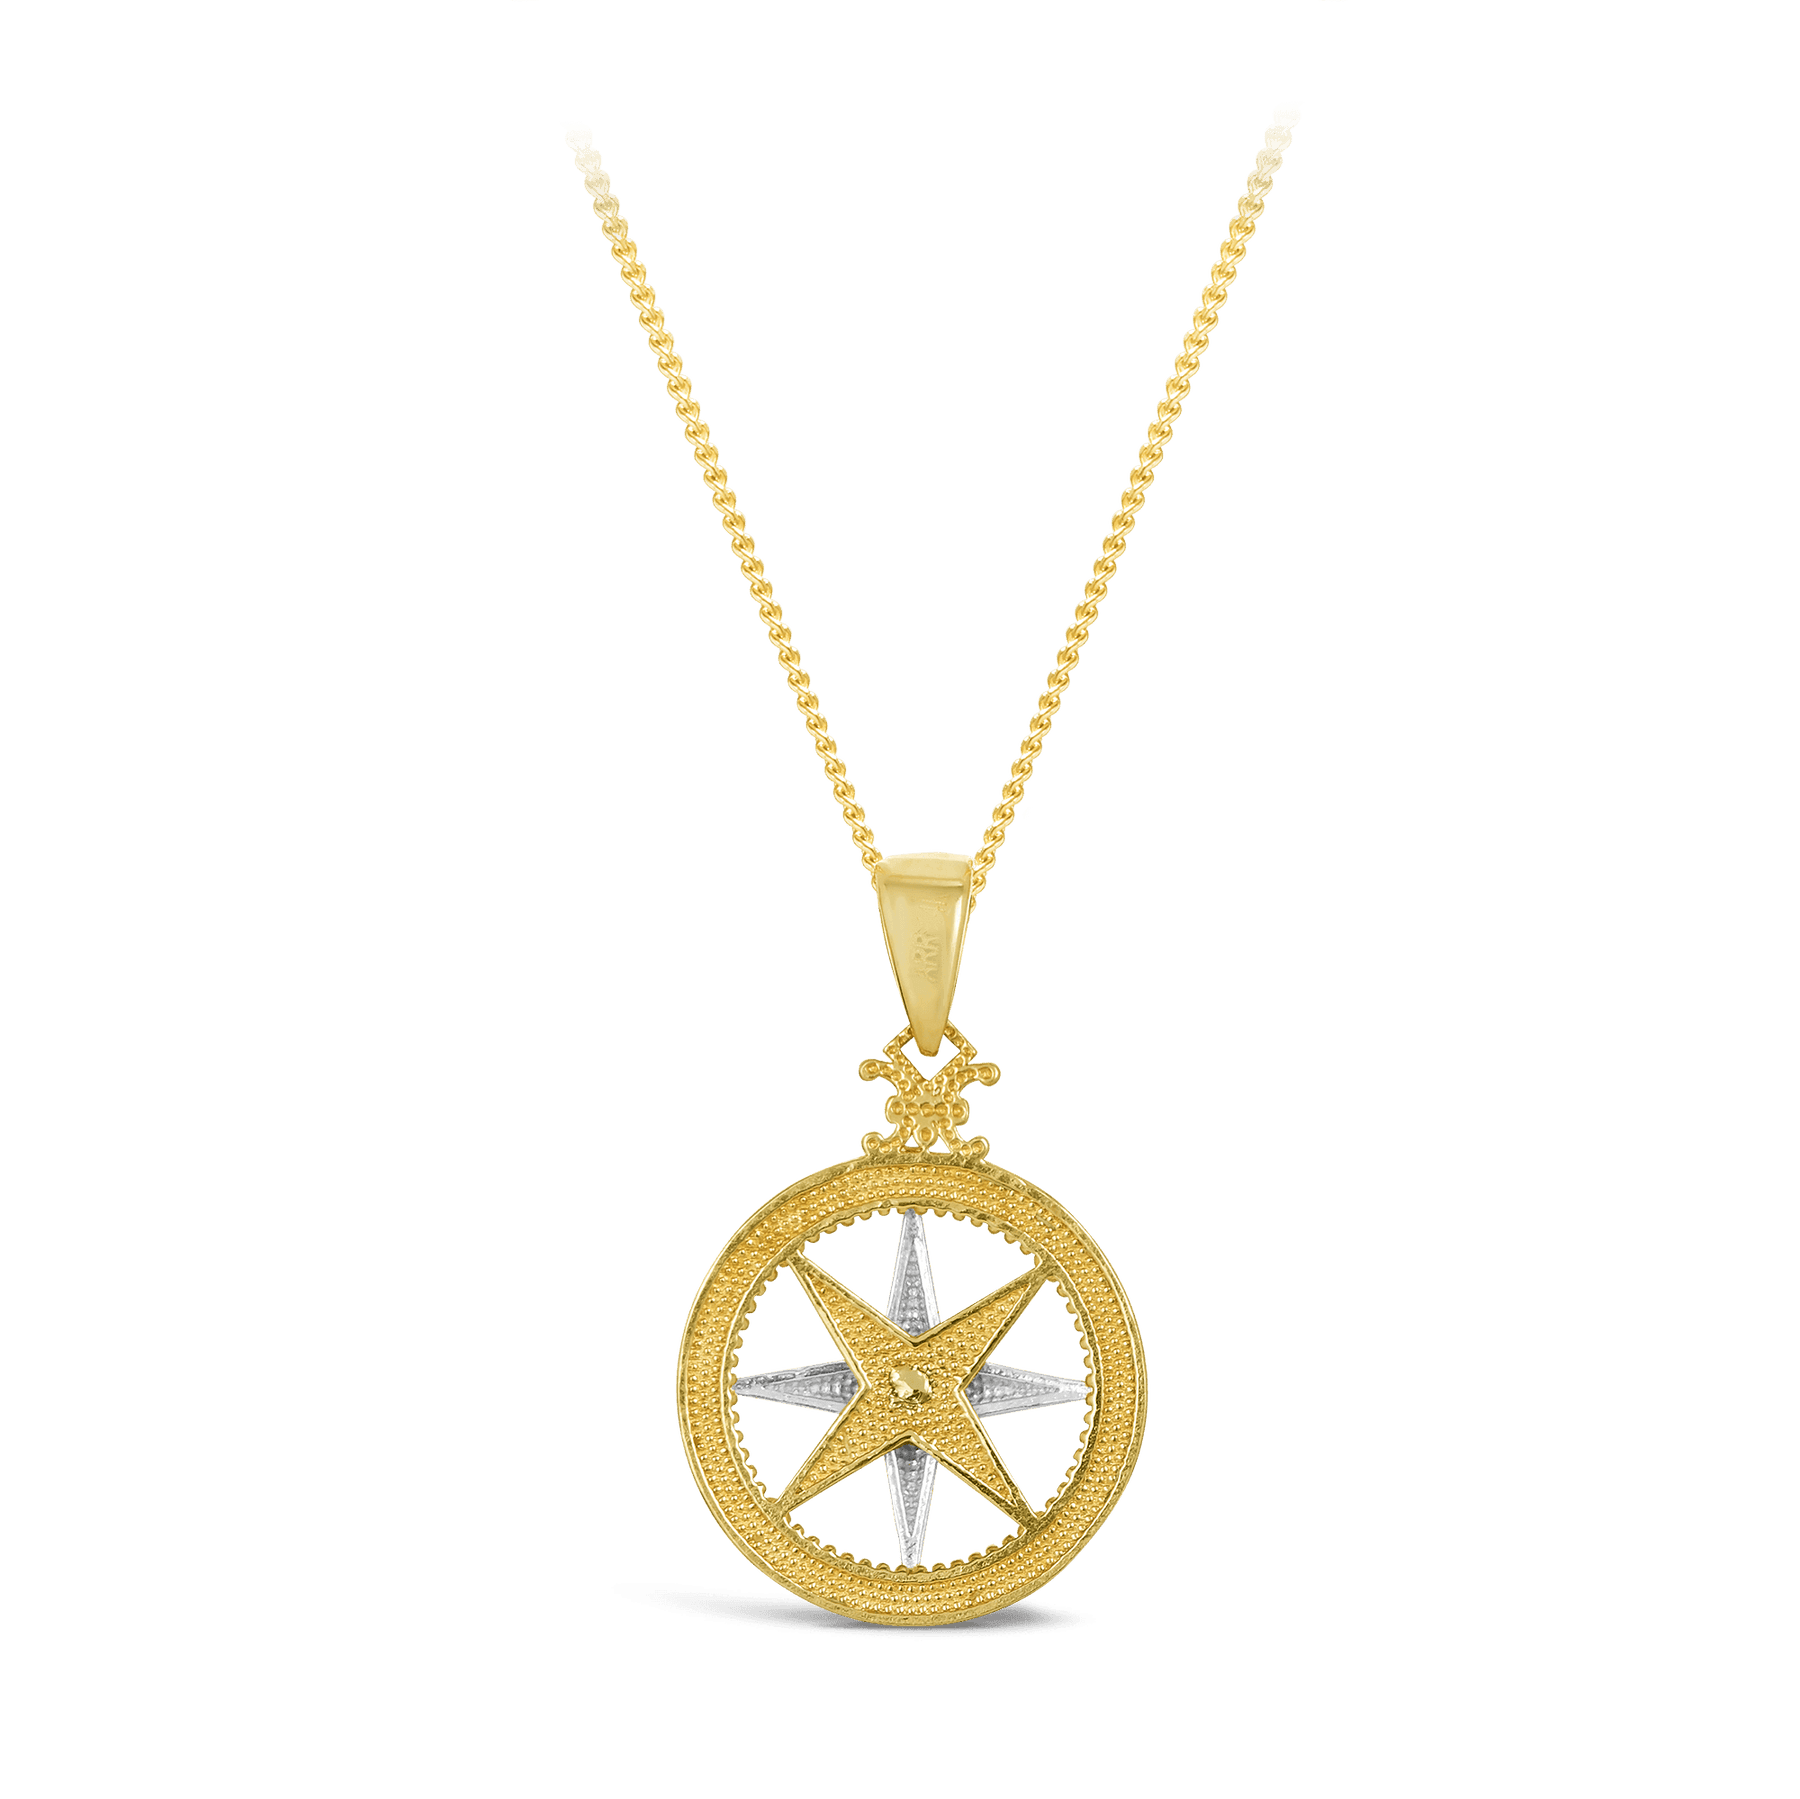 North Star Compass Pendant in 9ct Yellow Gold - Wallace Bishop